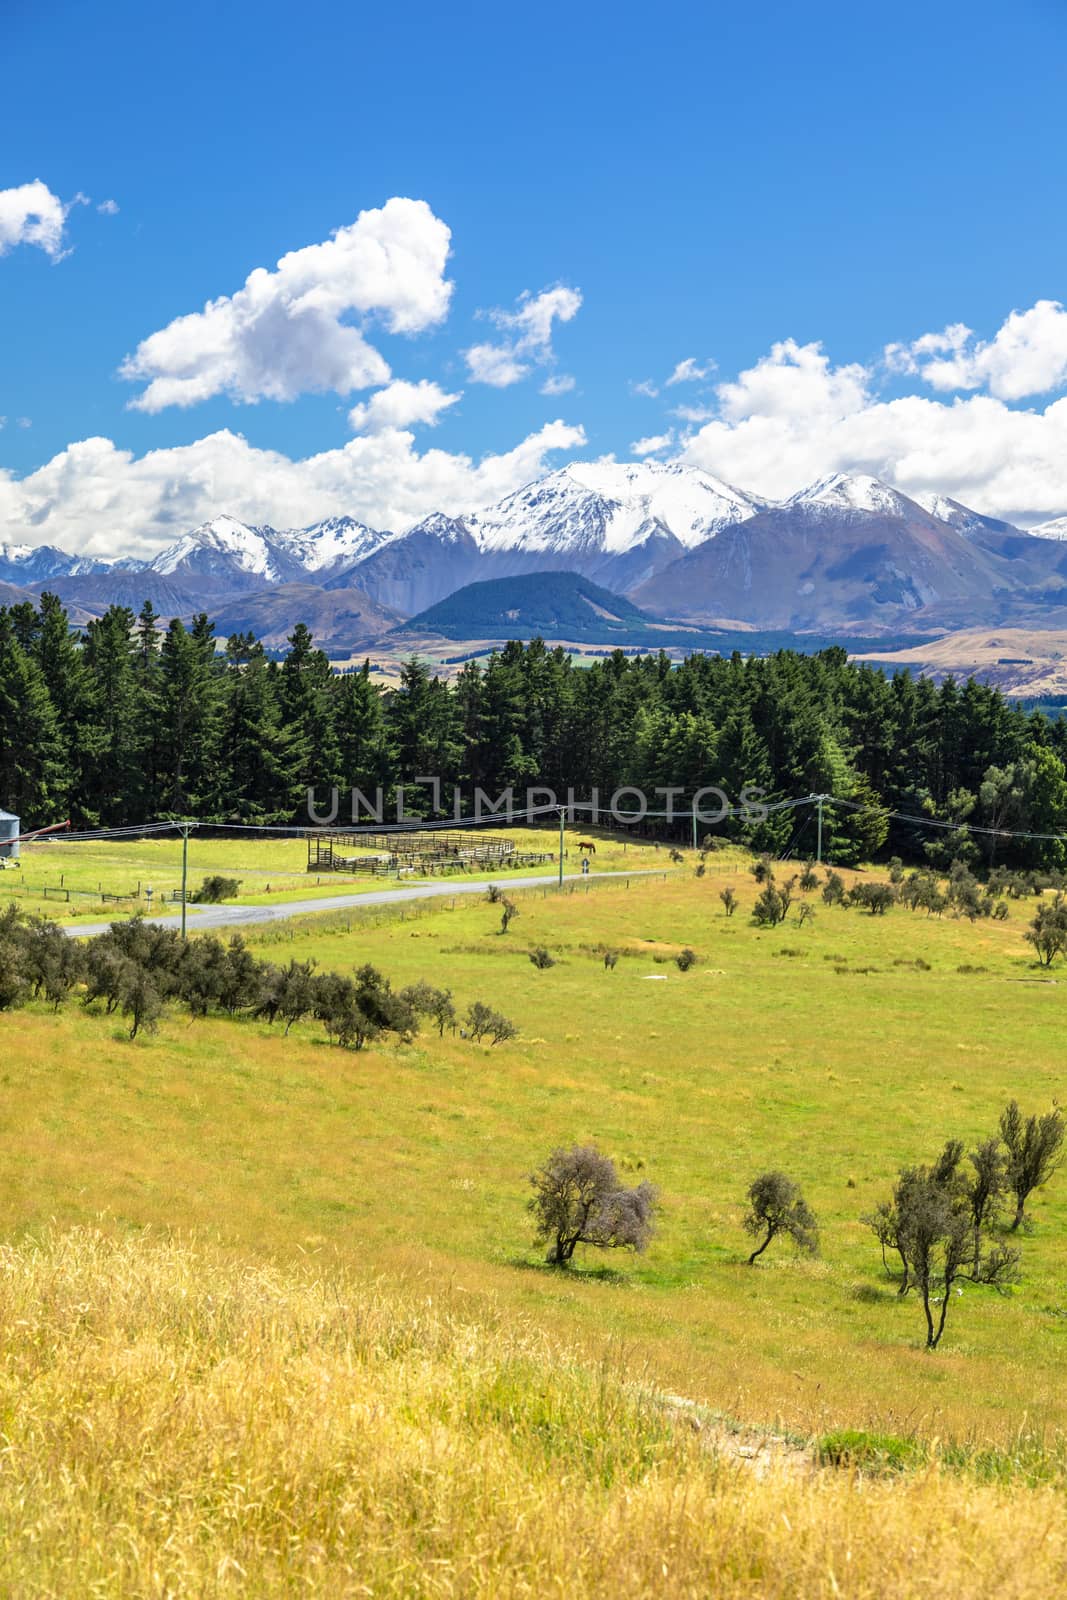 An image of the Mountain Alps scenery in south New Zealand